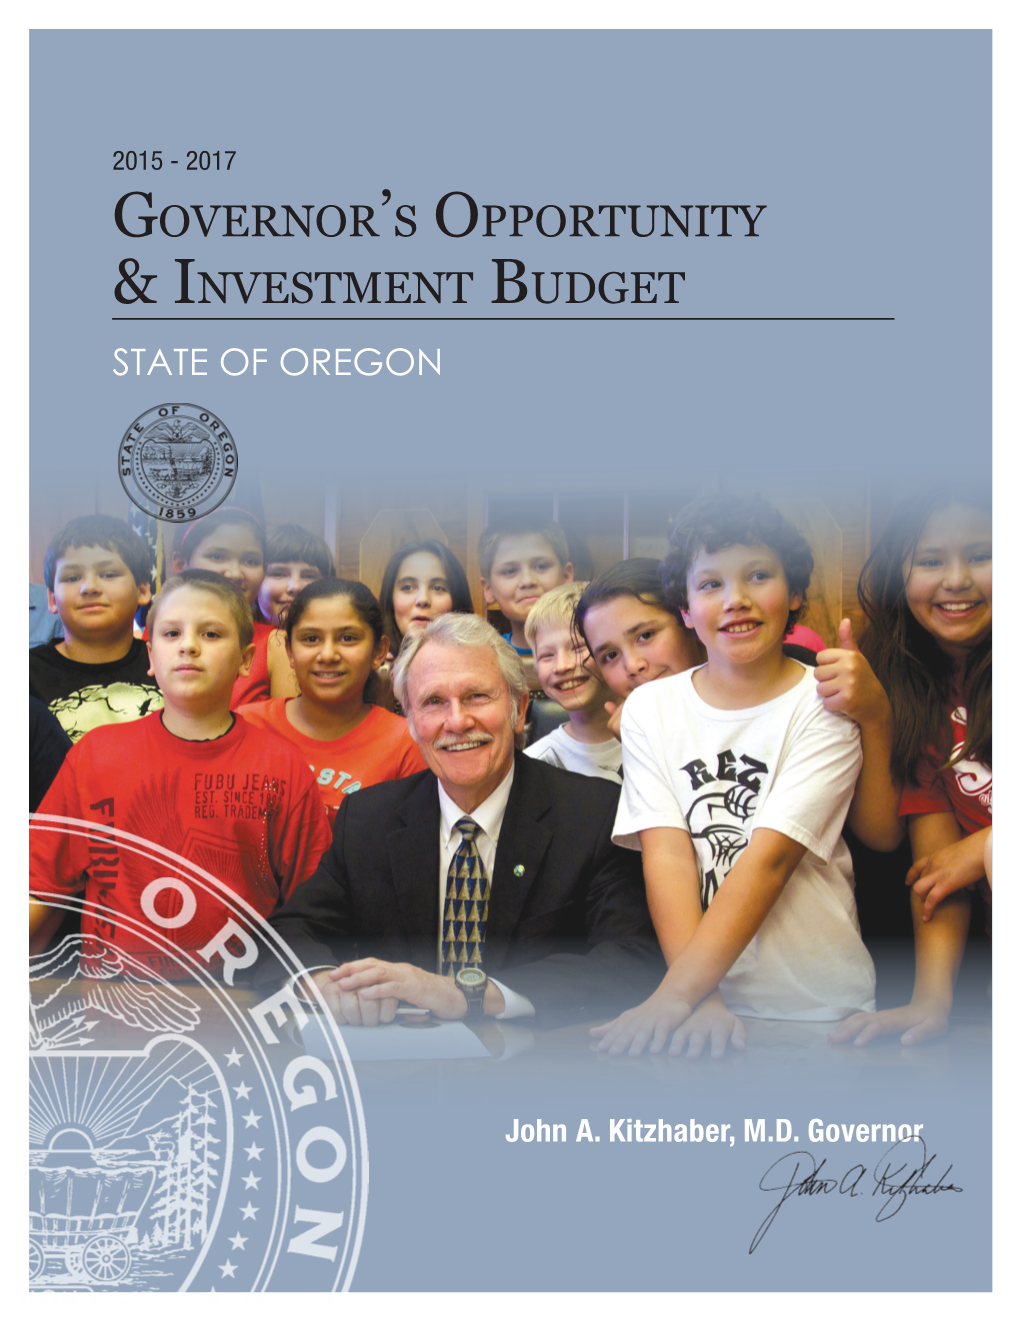 Governor's Opportunity & Investment Budget